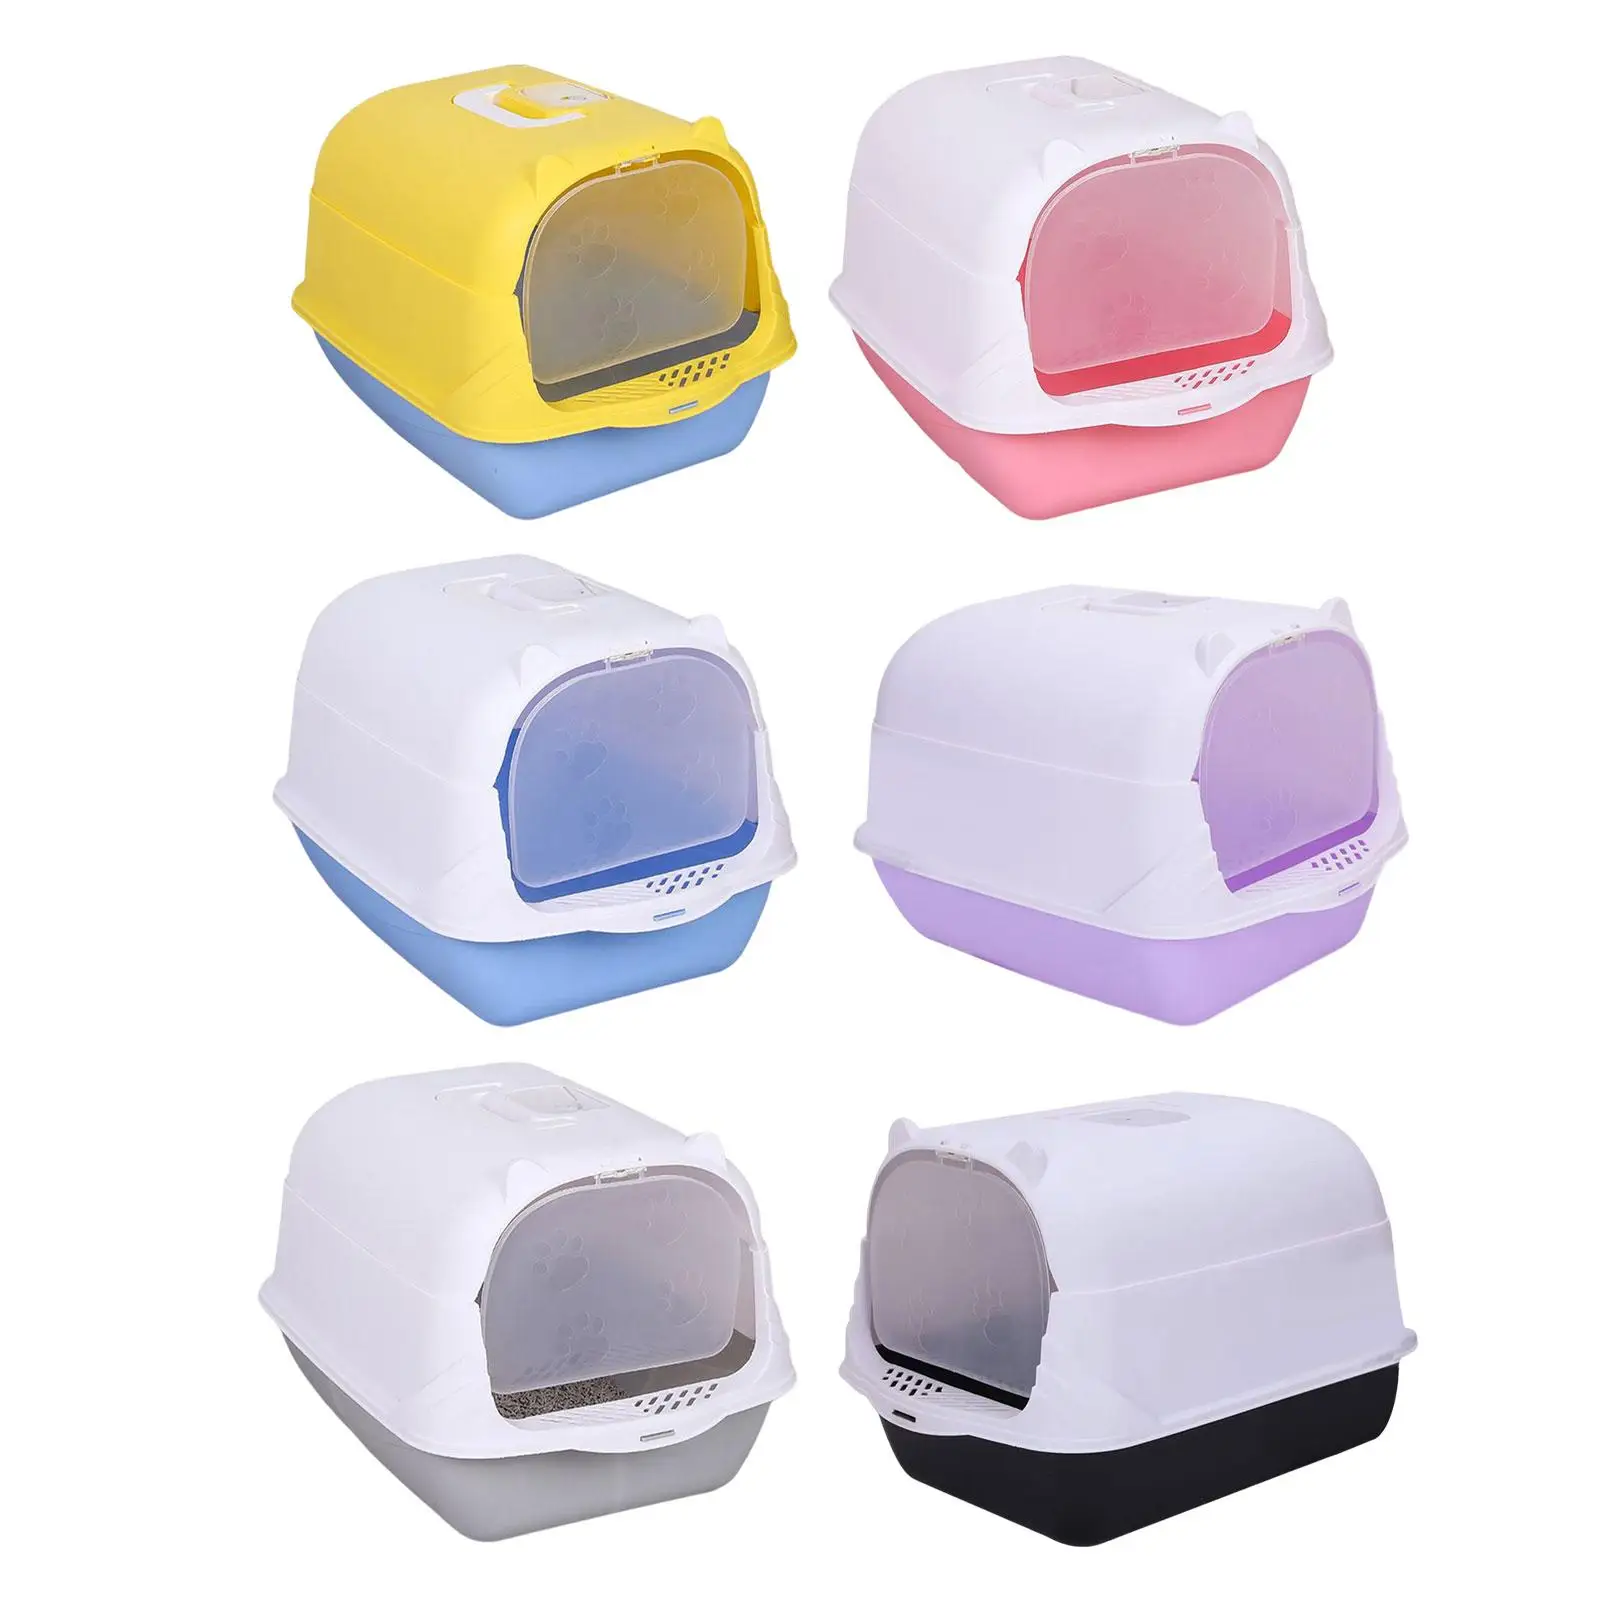 High Sided Hooded Cat Box Closed Litter Pan Bedpan with Gate Spoon Deep Loupet